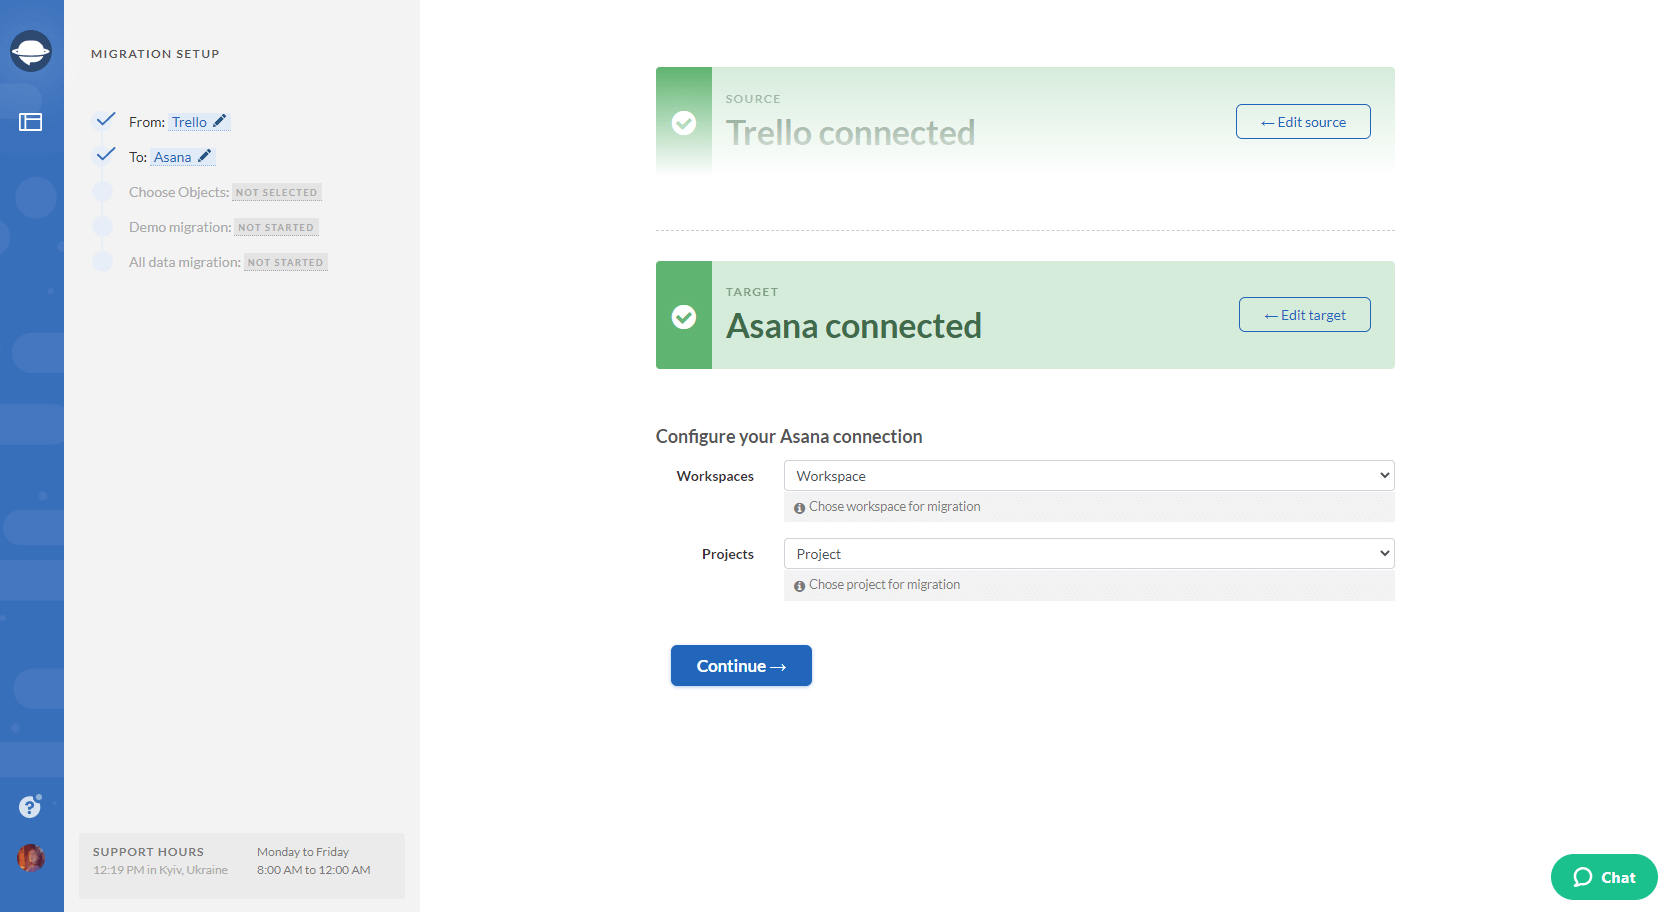 Connecting Asana Workspaces and Projects